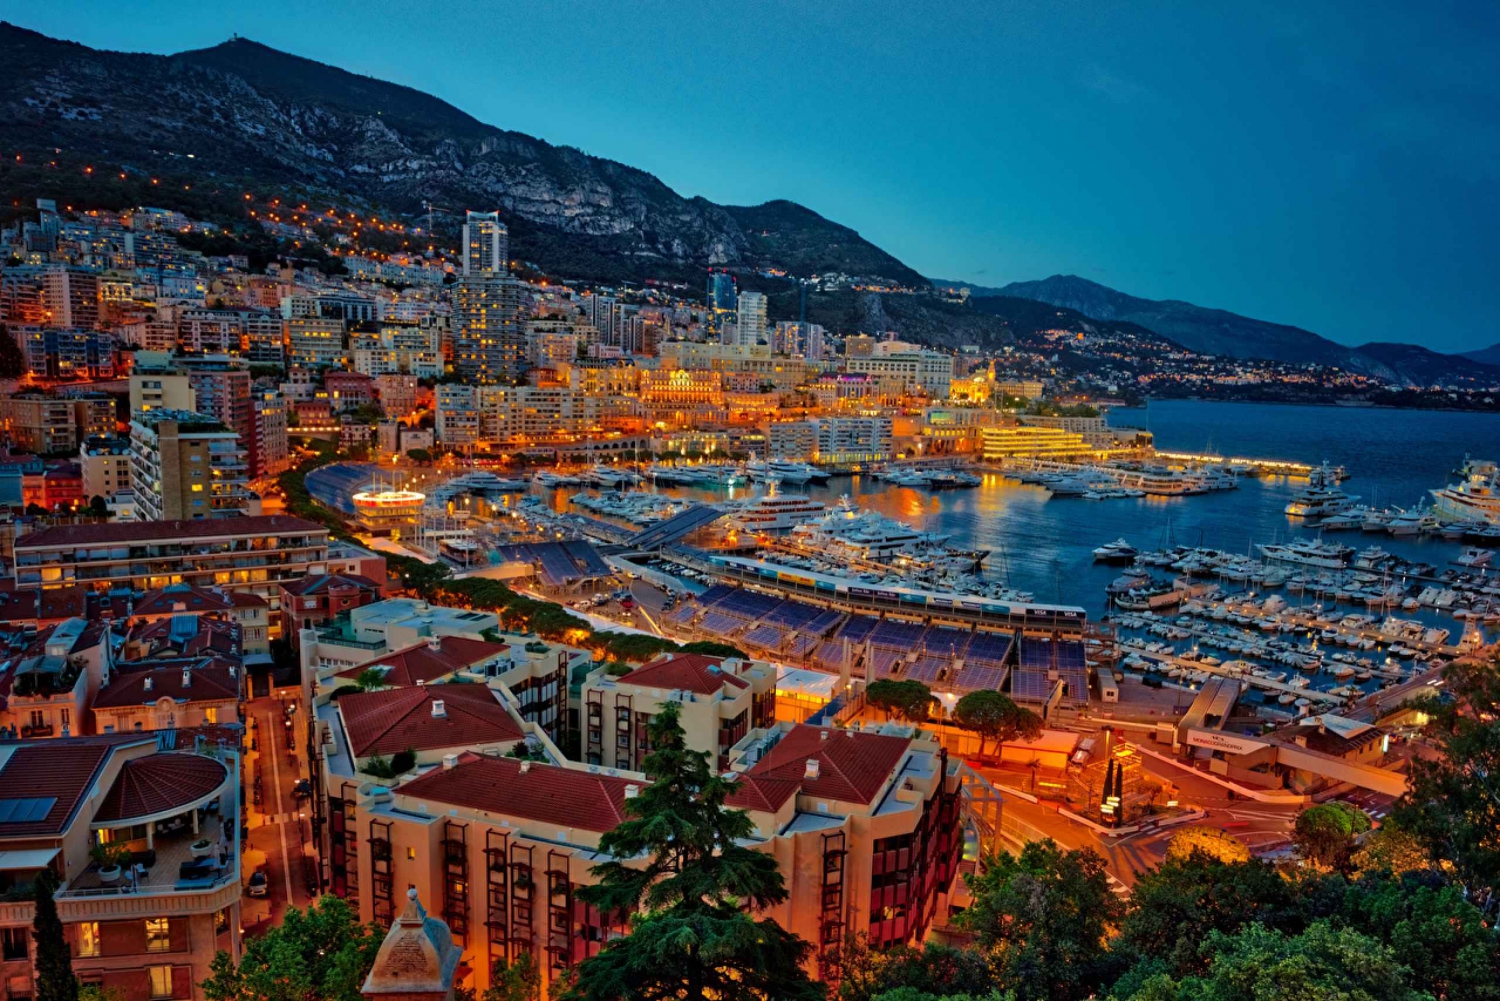 Monaco and Monte-Carlo by Night from Nice